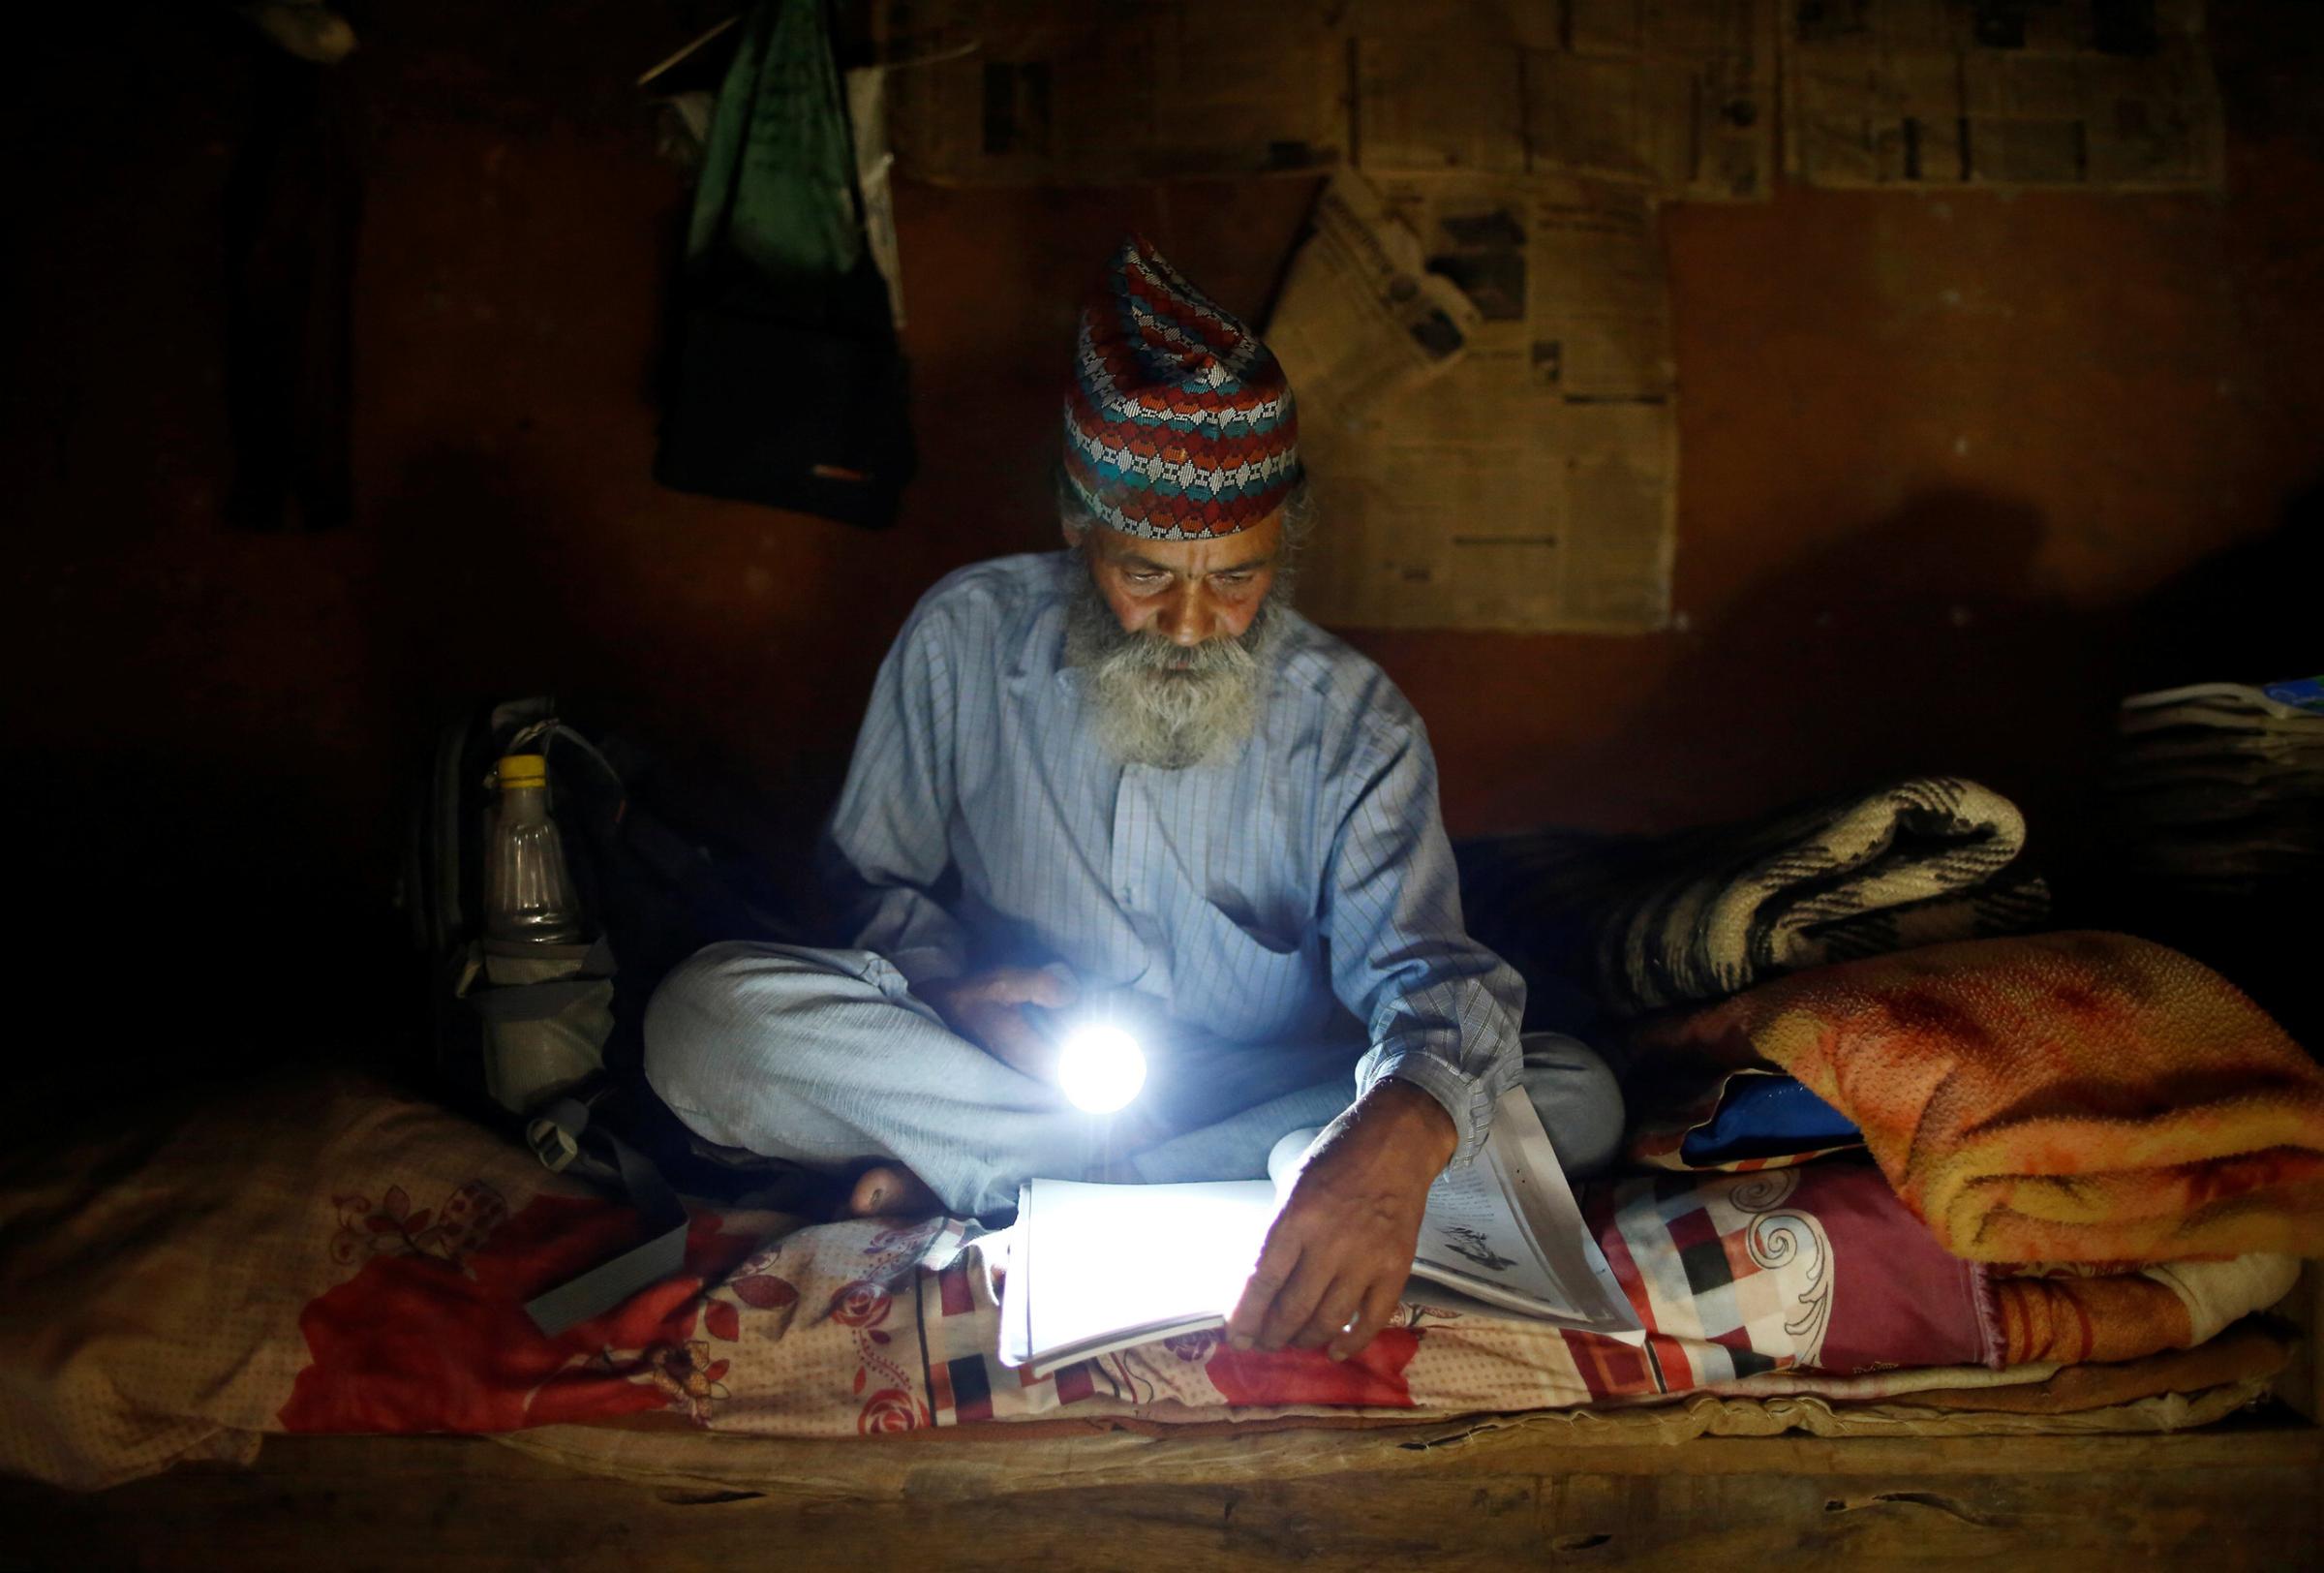 Durga Kami, 68, who is studying in the tenth grade at Shree Kala Bhairab Higher Secondary School, uses a torch to read a book during a power cut, at his one-room house in Syangja, Nepal, June 4, 2016. REUTERS/Navesh Chitrakar. SEARCH "DURGA KAMI" FOR THIS STORY. SEARCH "THE WIDER IMAGE" FOR ALL STORIES